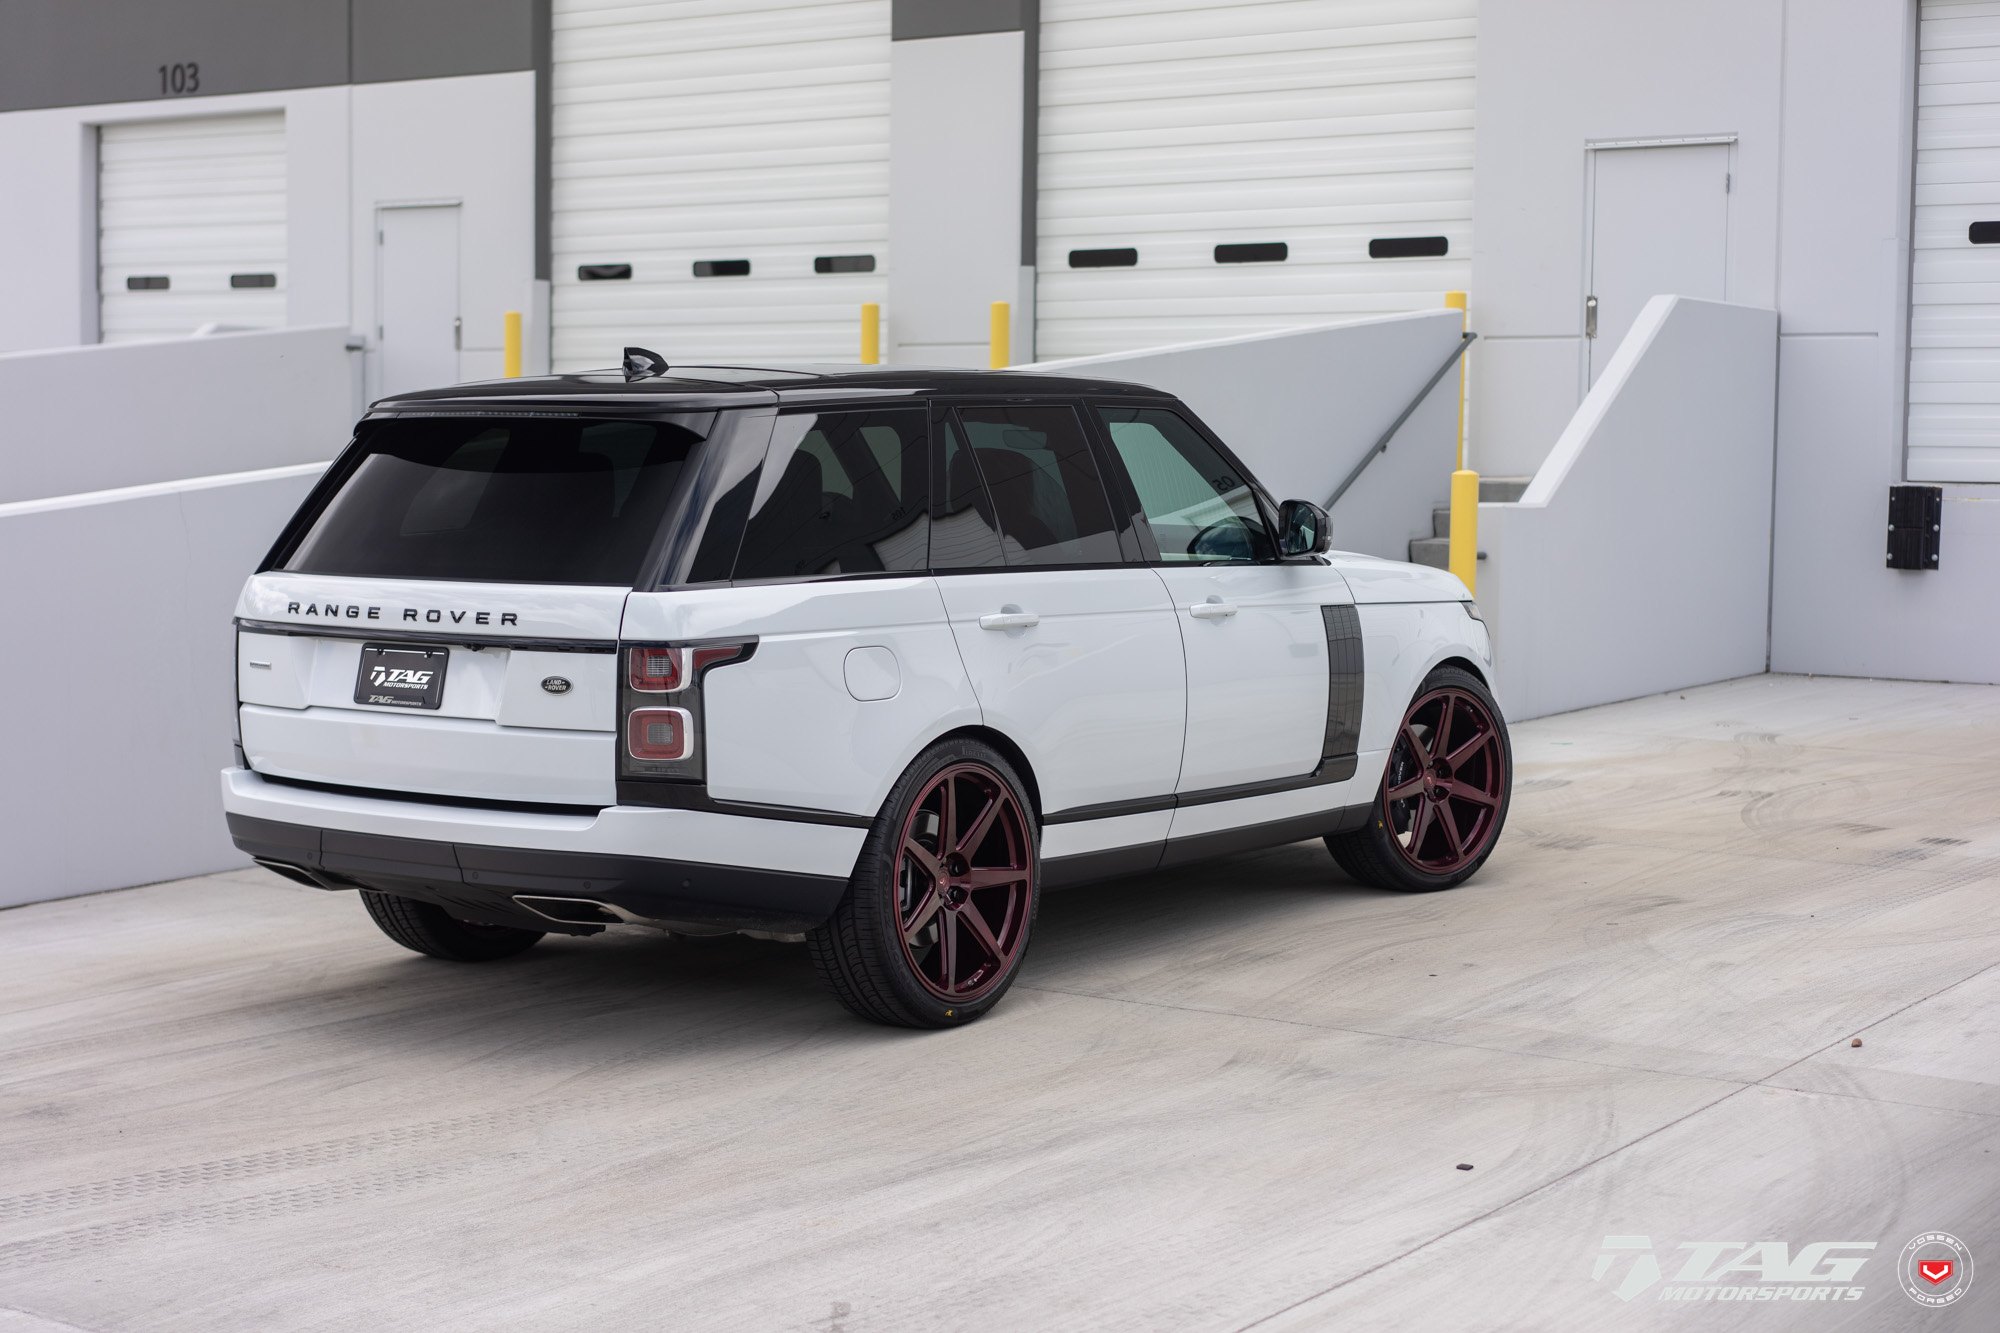 Aftermarket Rear Diffuser on White Range Rover - Photo by Vossen